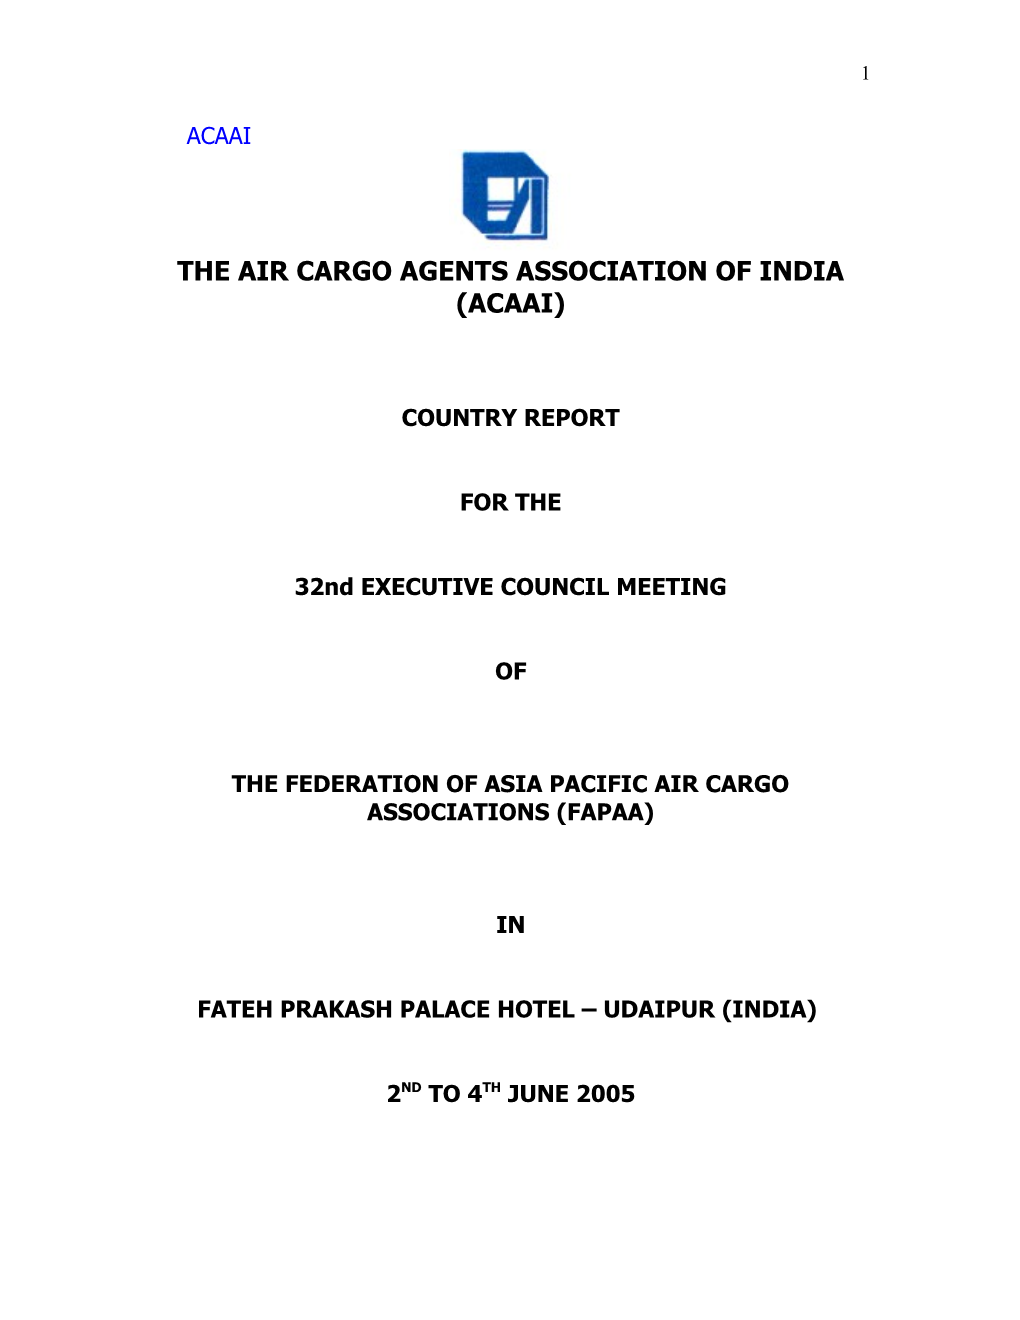 The Air Cargo Agents Association of India (Acaai)